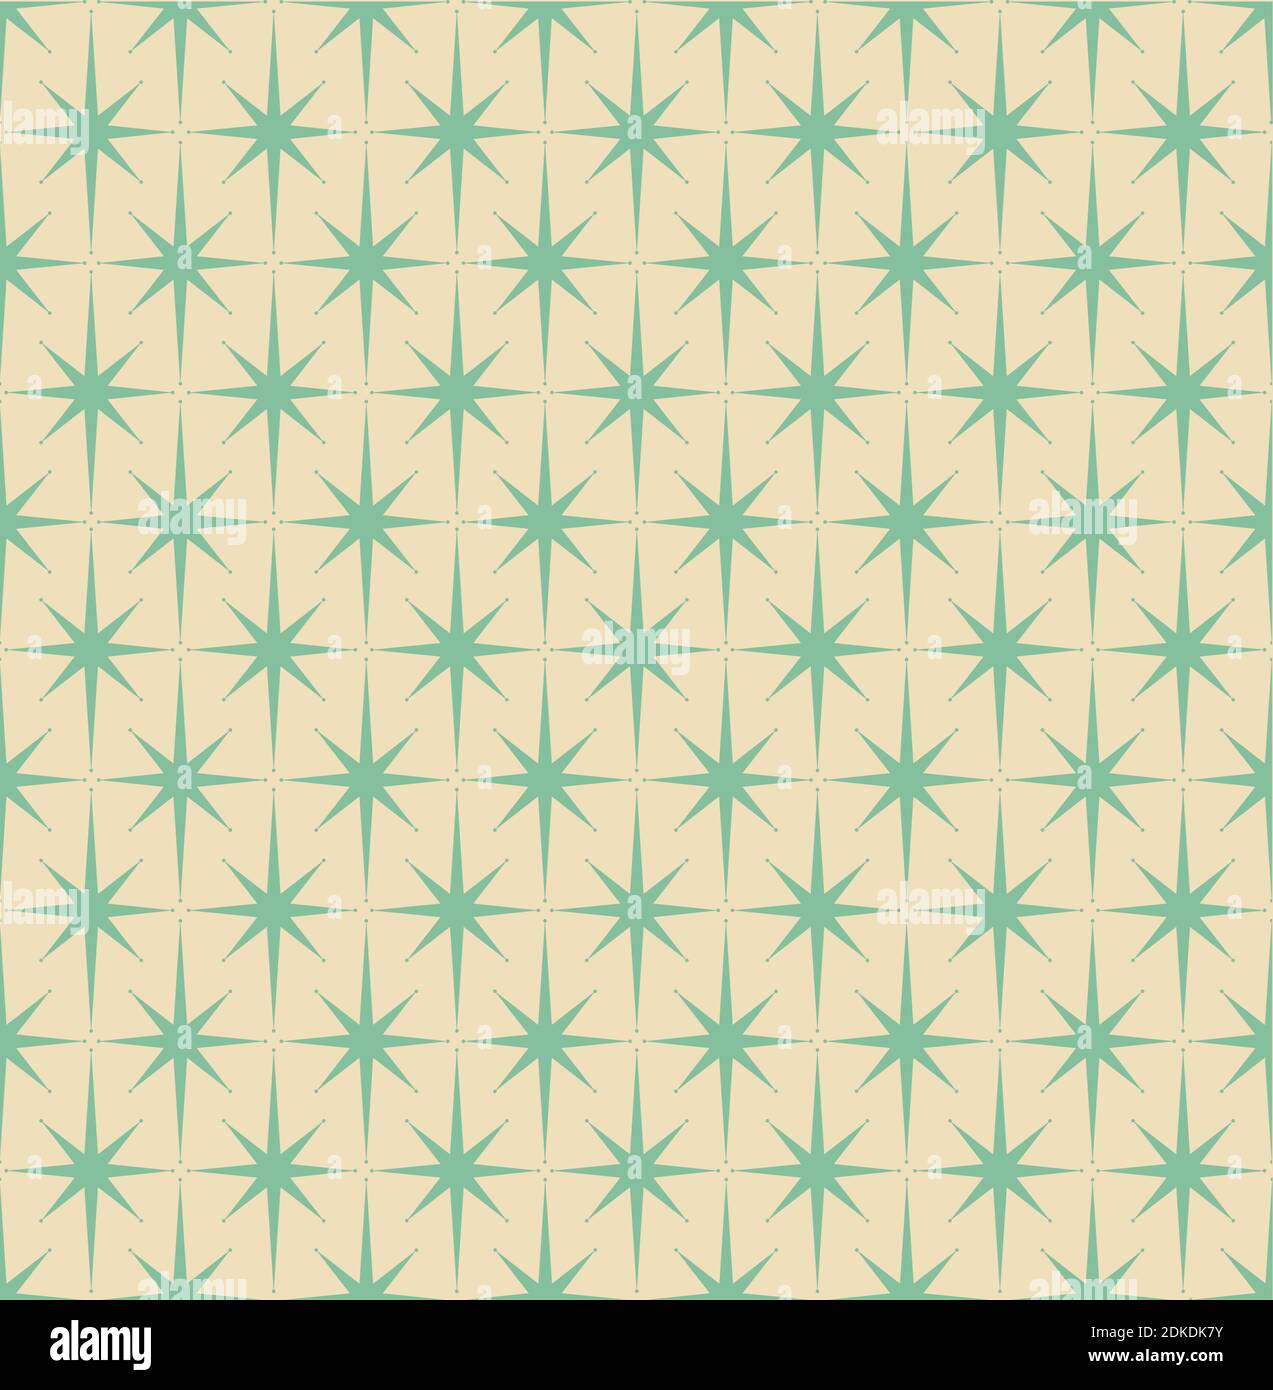 Mid-century modern wrapping paper green starburst pattern on cream background.  Inspired by Atomic era. Repeatable and seamless. Stock Vector